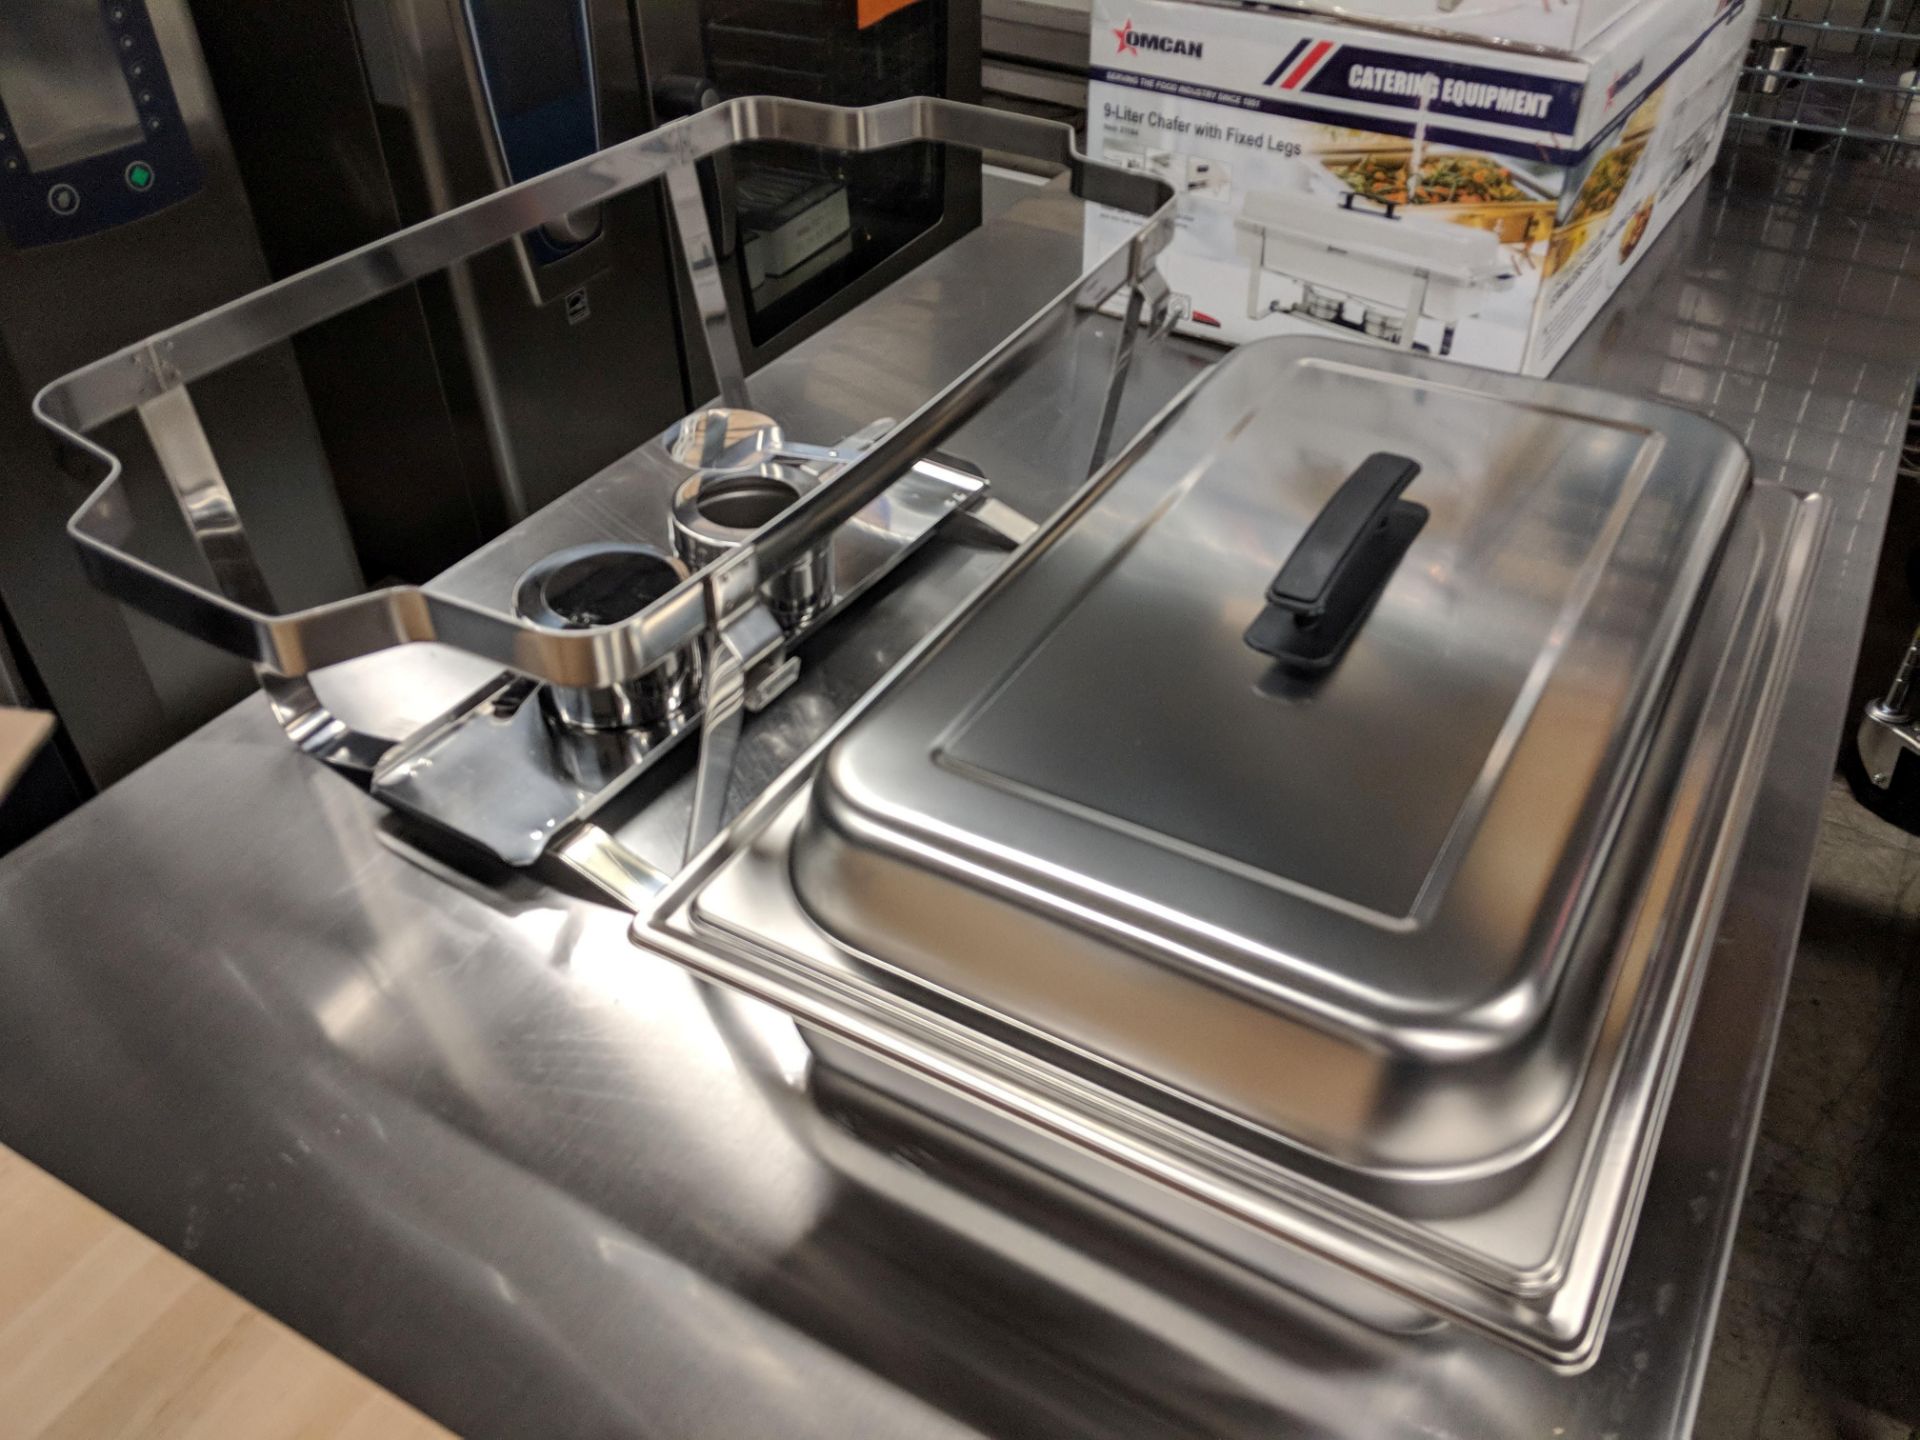 9L Stainless Chafing Dish with Fixed Legs - Image 3 of 5